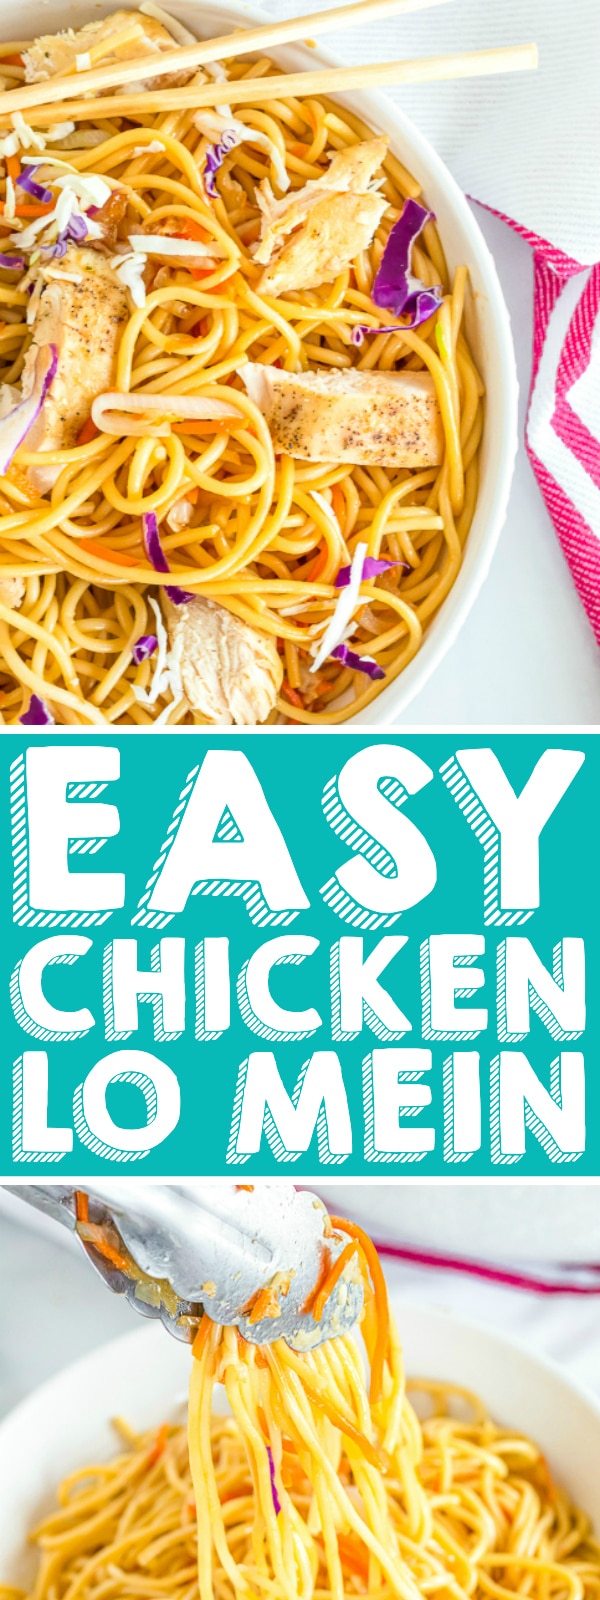 This recipe for homemade chicken lo mein is an easy family dinner the whole family will love! Noodles, vegetables, and soy sauce combine for a light, fresh meal that makes a tasty dinner and leftovers! | THE LOVE NERDS #chickendinner #easychickenlomein #chinesechickenrecipe